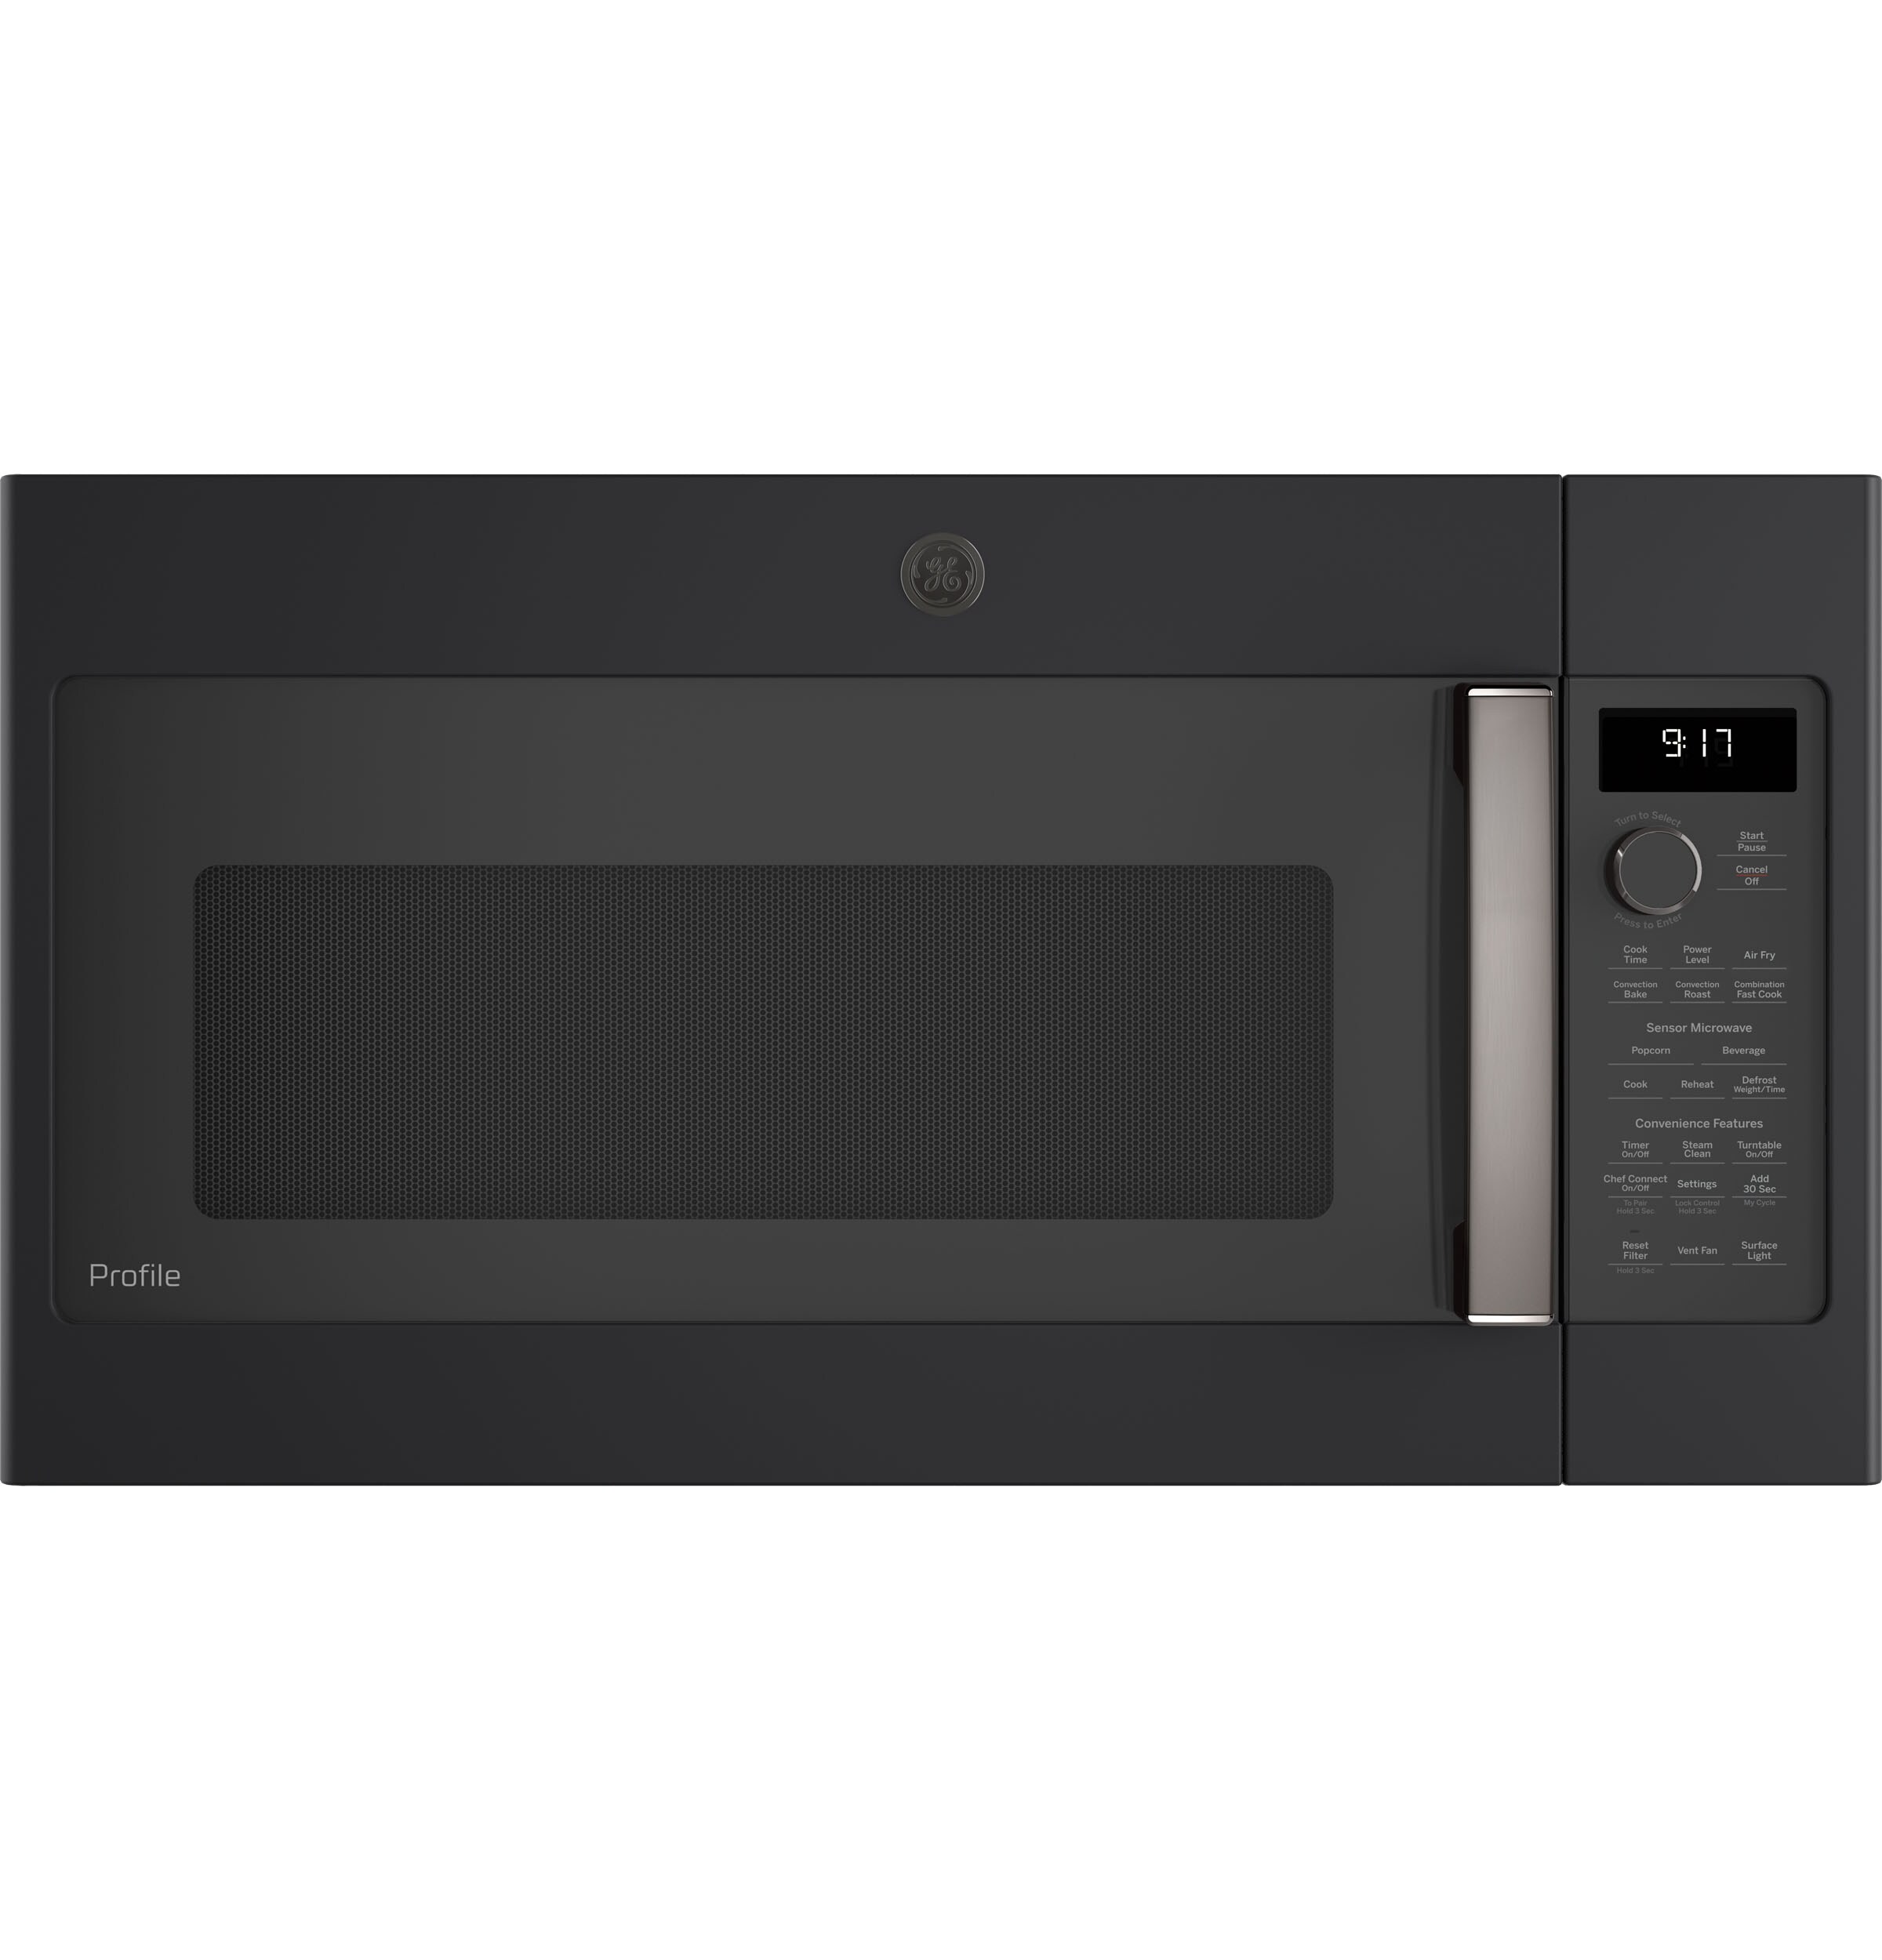 Cheap Cyber Monday Samsung Microwave Oven Deals at Appliances Direct